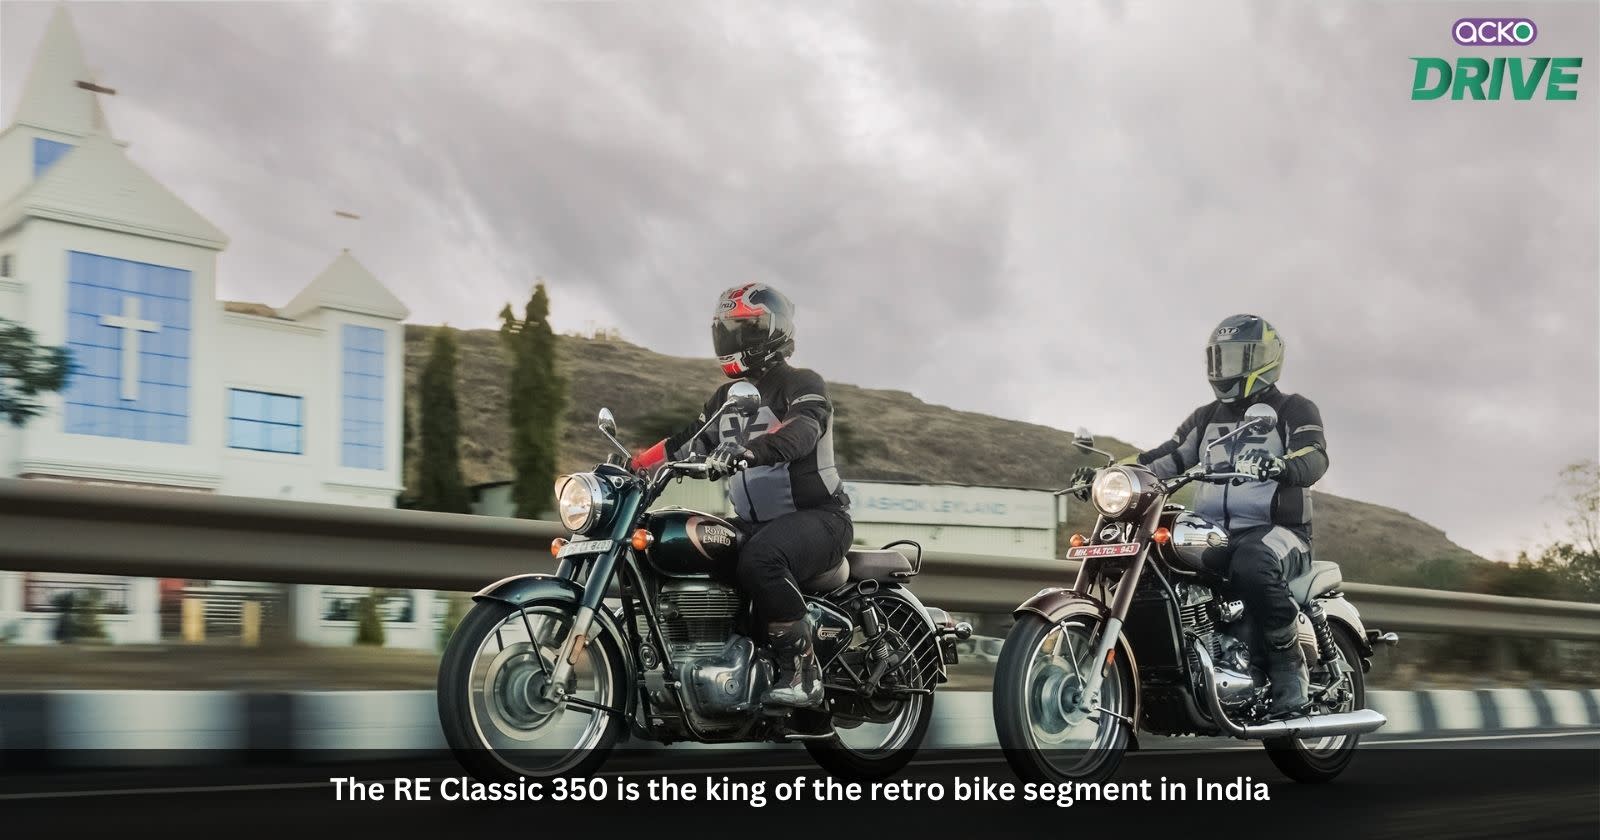 The RE Classic 350 is the king of the retro bike segment in India
